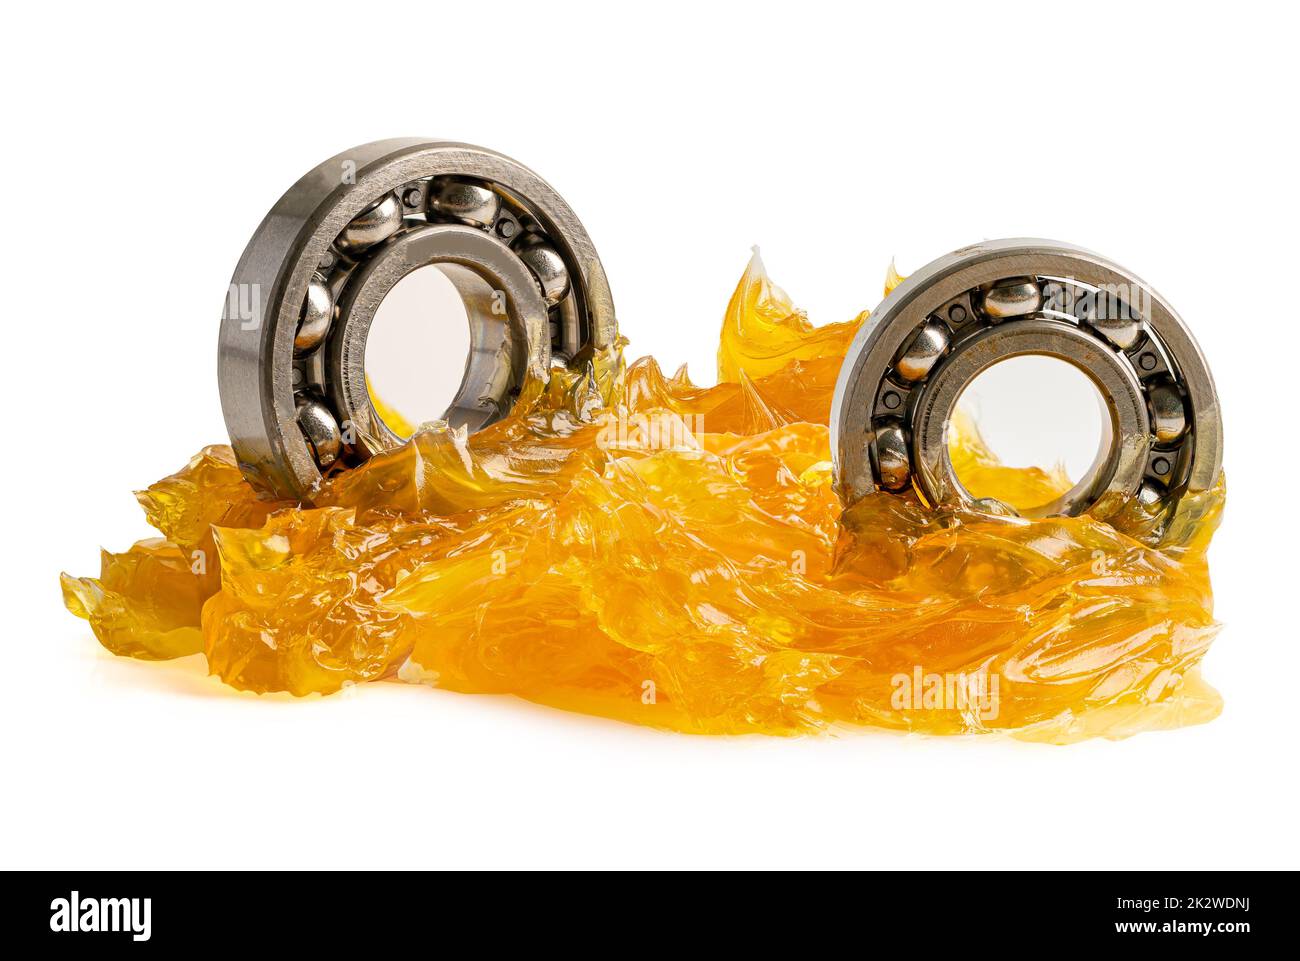 Ball bearing stainless with grease lithium machinery lubrication for automotive and industrial  isolated on white background Stock Photo